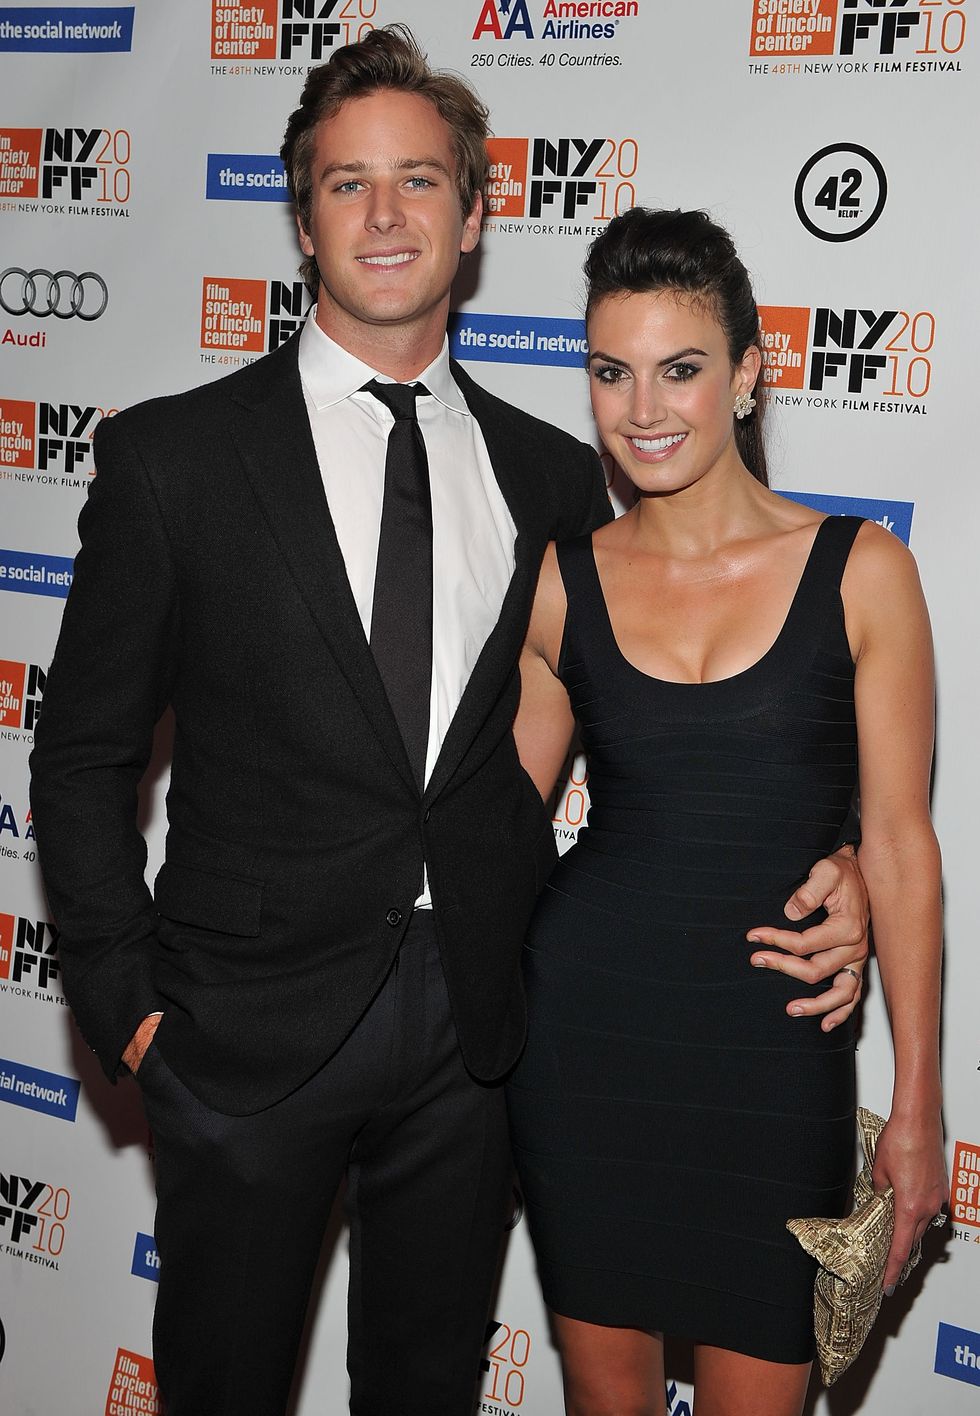 actor armie hammer and elizabeth chambers attend the premiere of the social network during the 48th new york film festival at alice tully hall, lincoln center on september 24, 2010 in new york city local caption